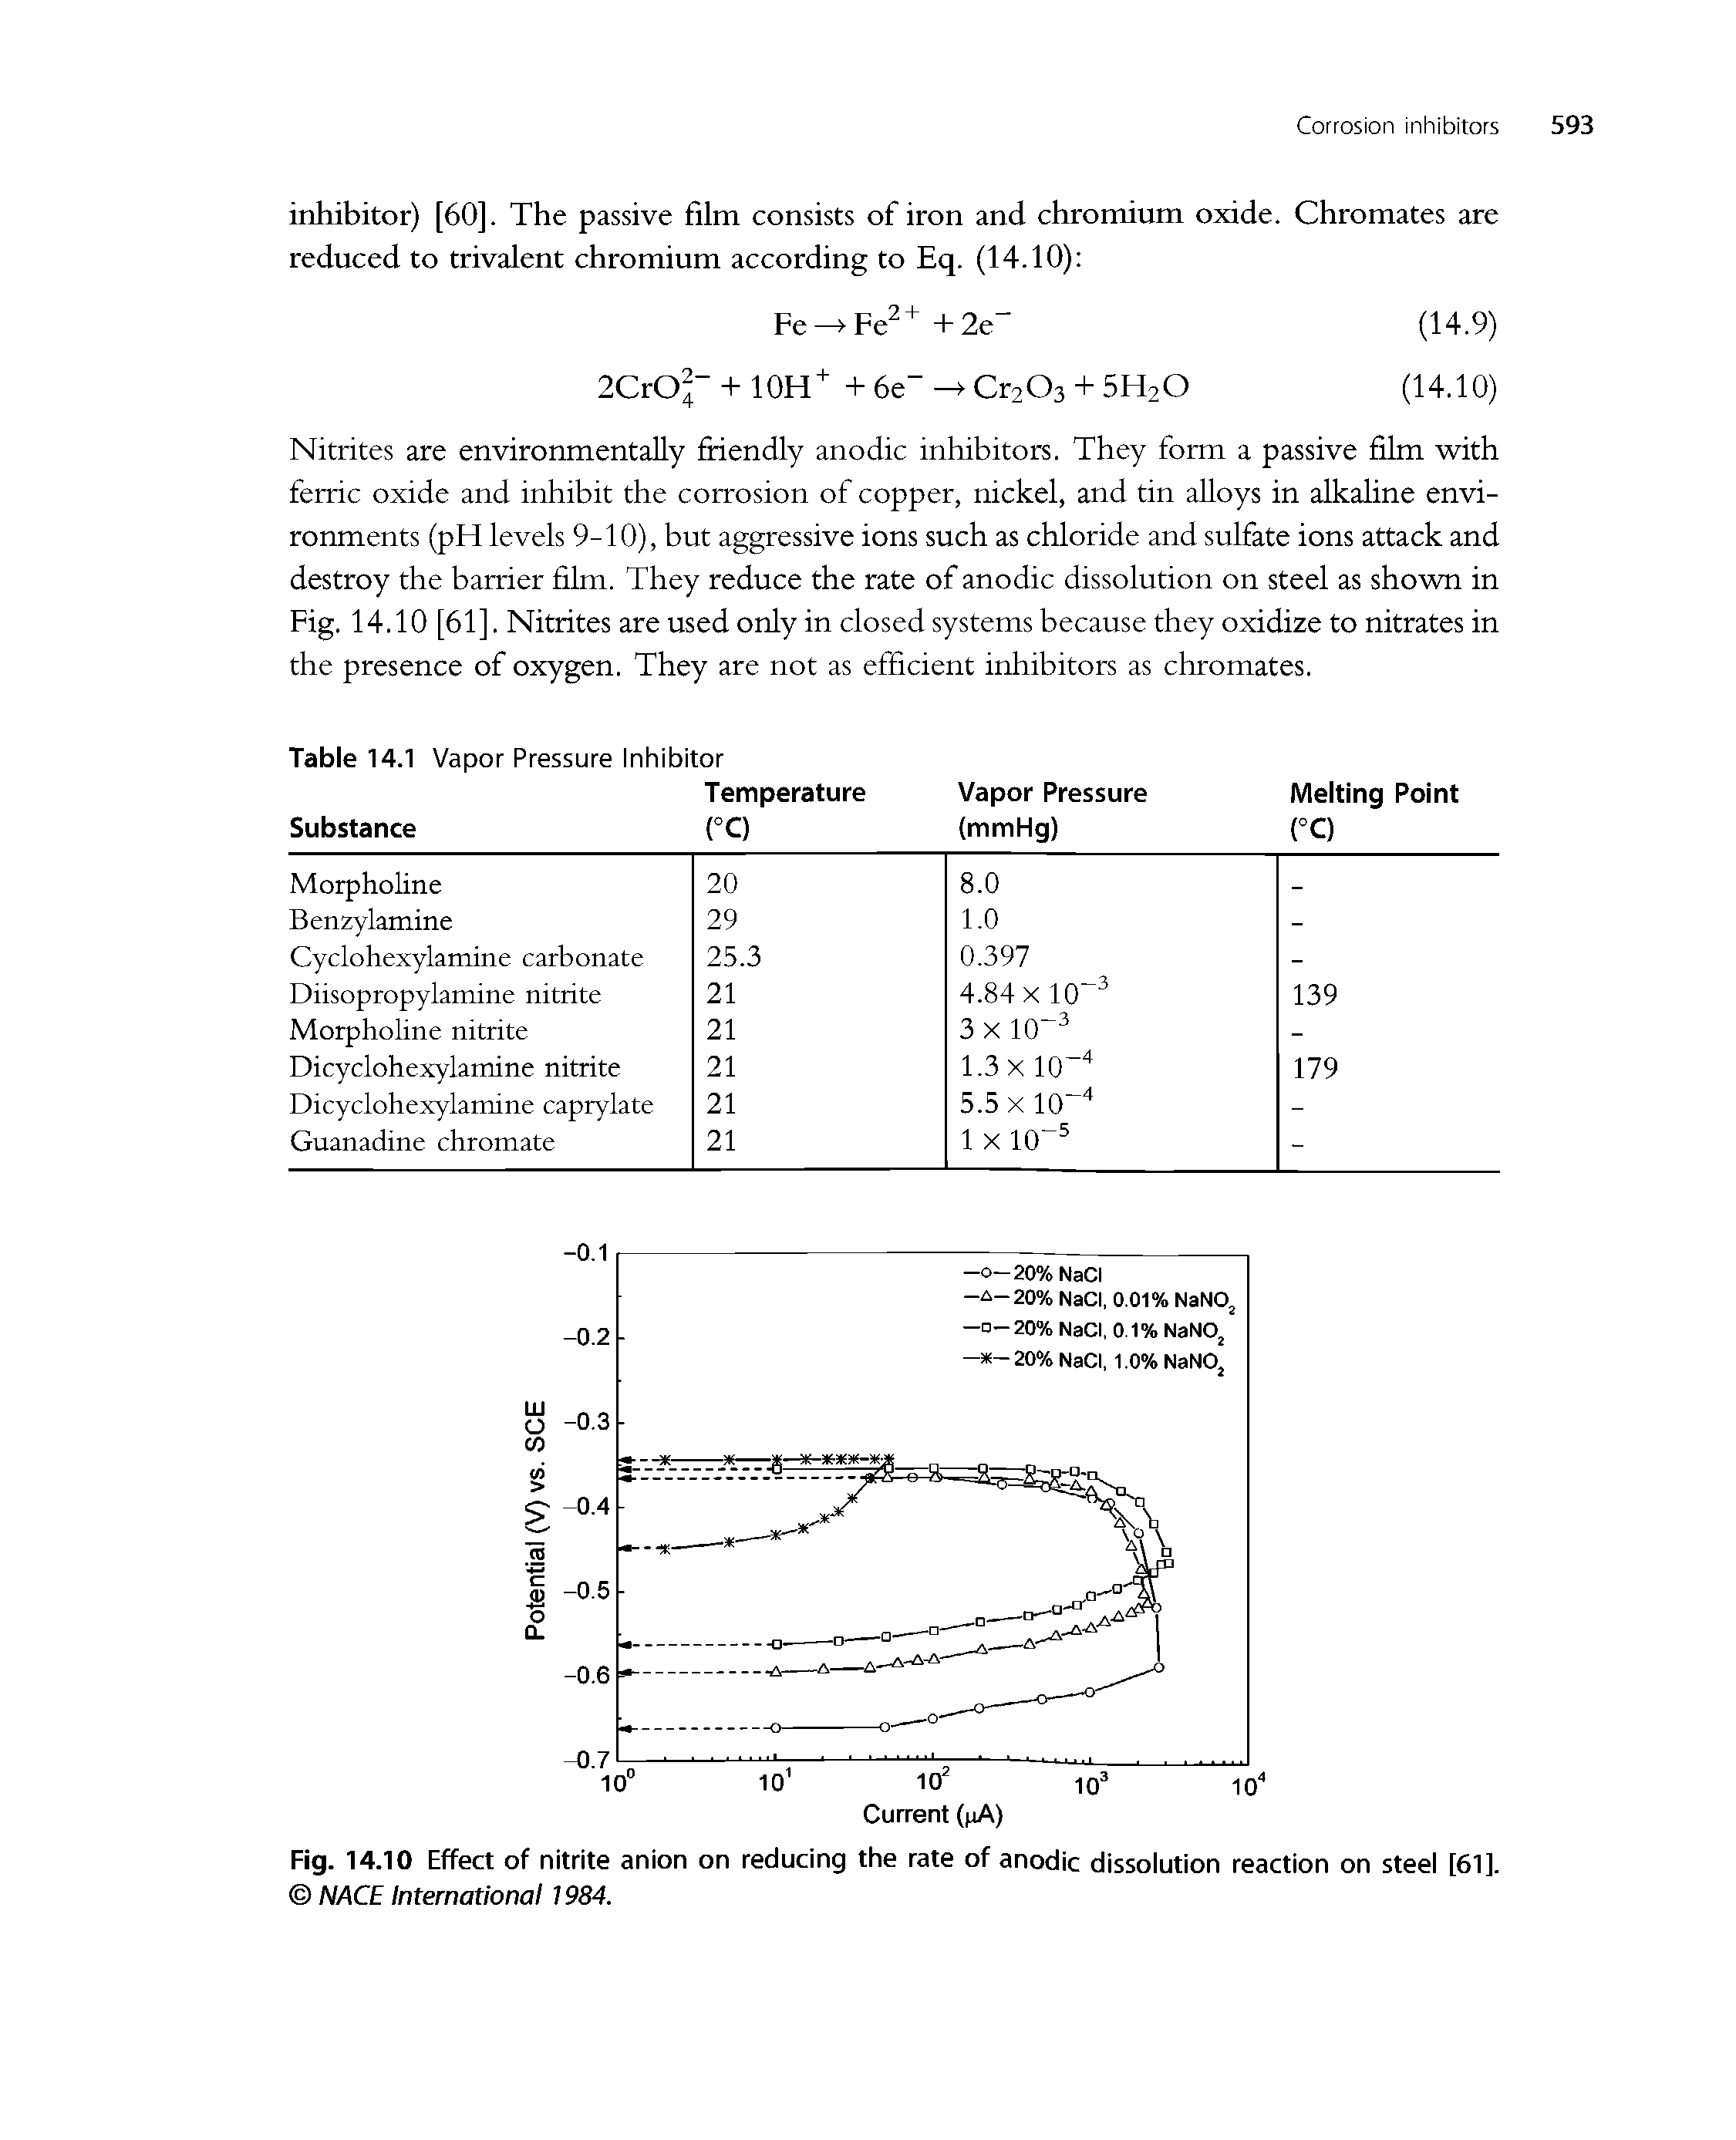 Fig. 14.10 Effect of nitrite anion on reducing the rate of anodic dissolution reaction on steel [61]. NACE International 1984.